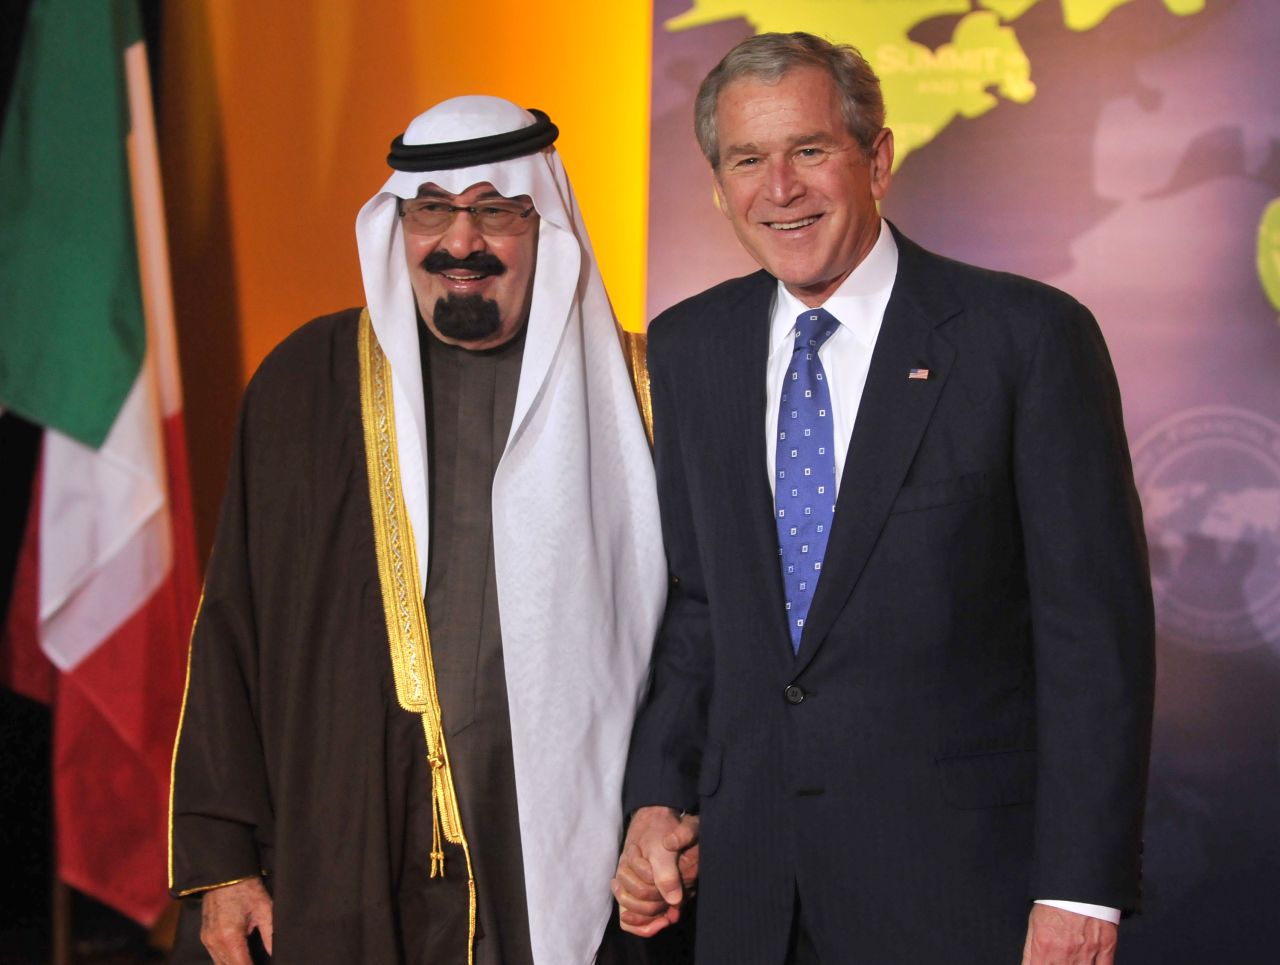 The King poses with U.S. President George W. Bush during an economic summit in Washington in November 2008.